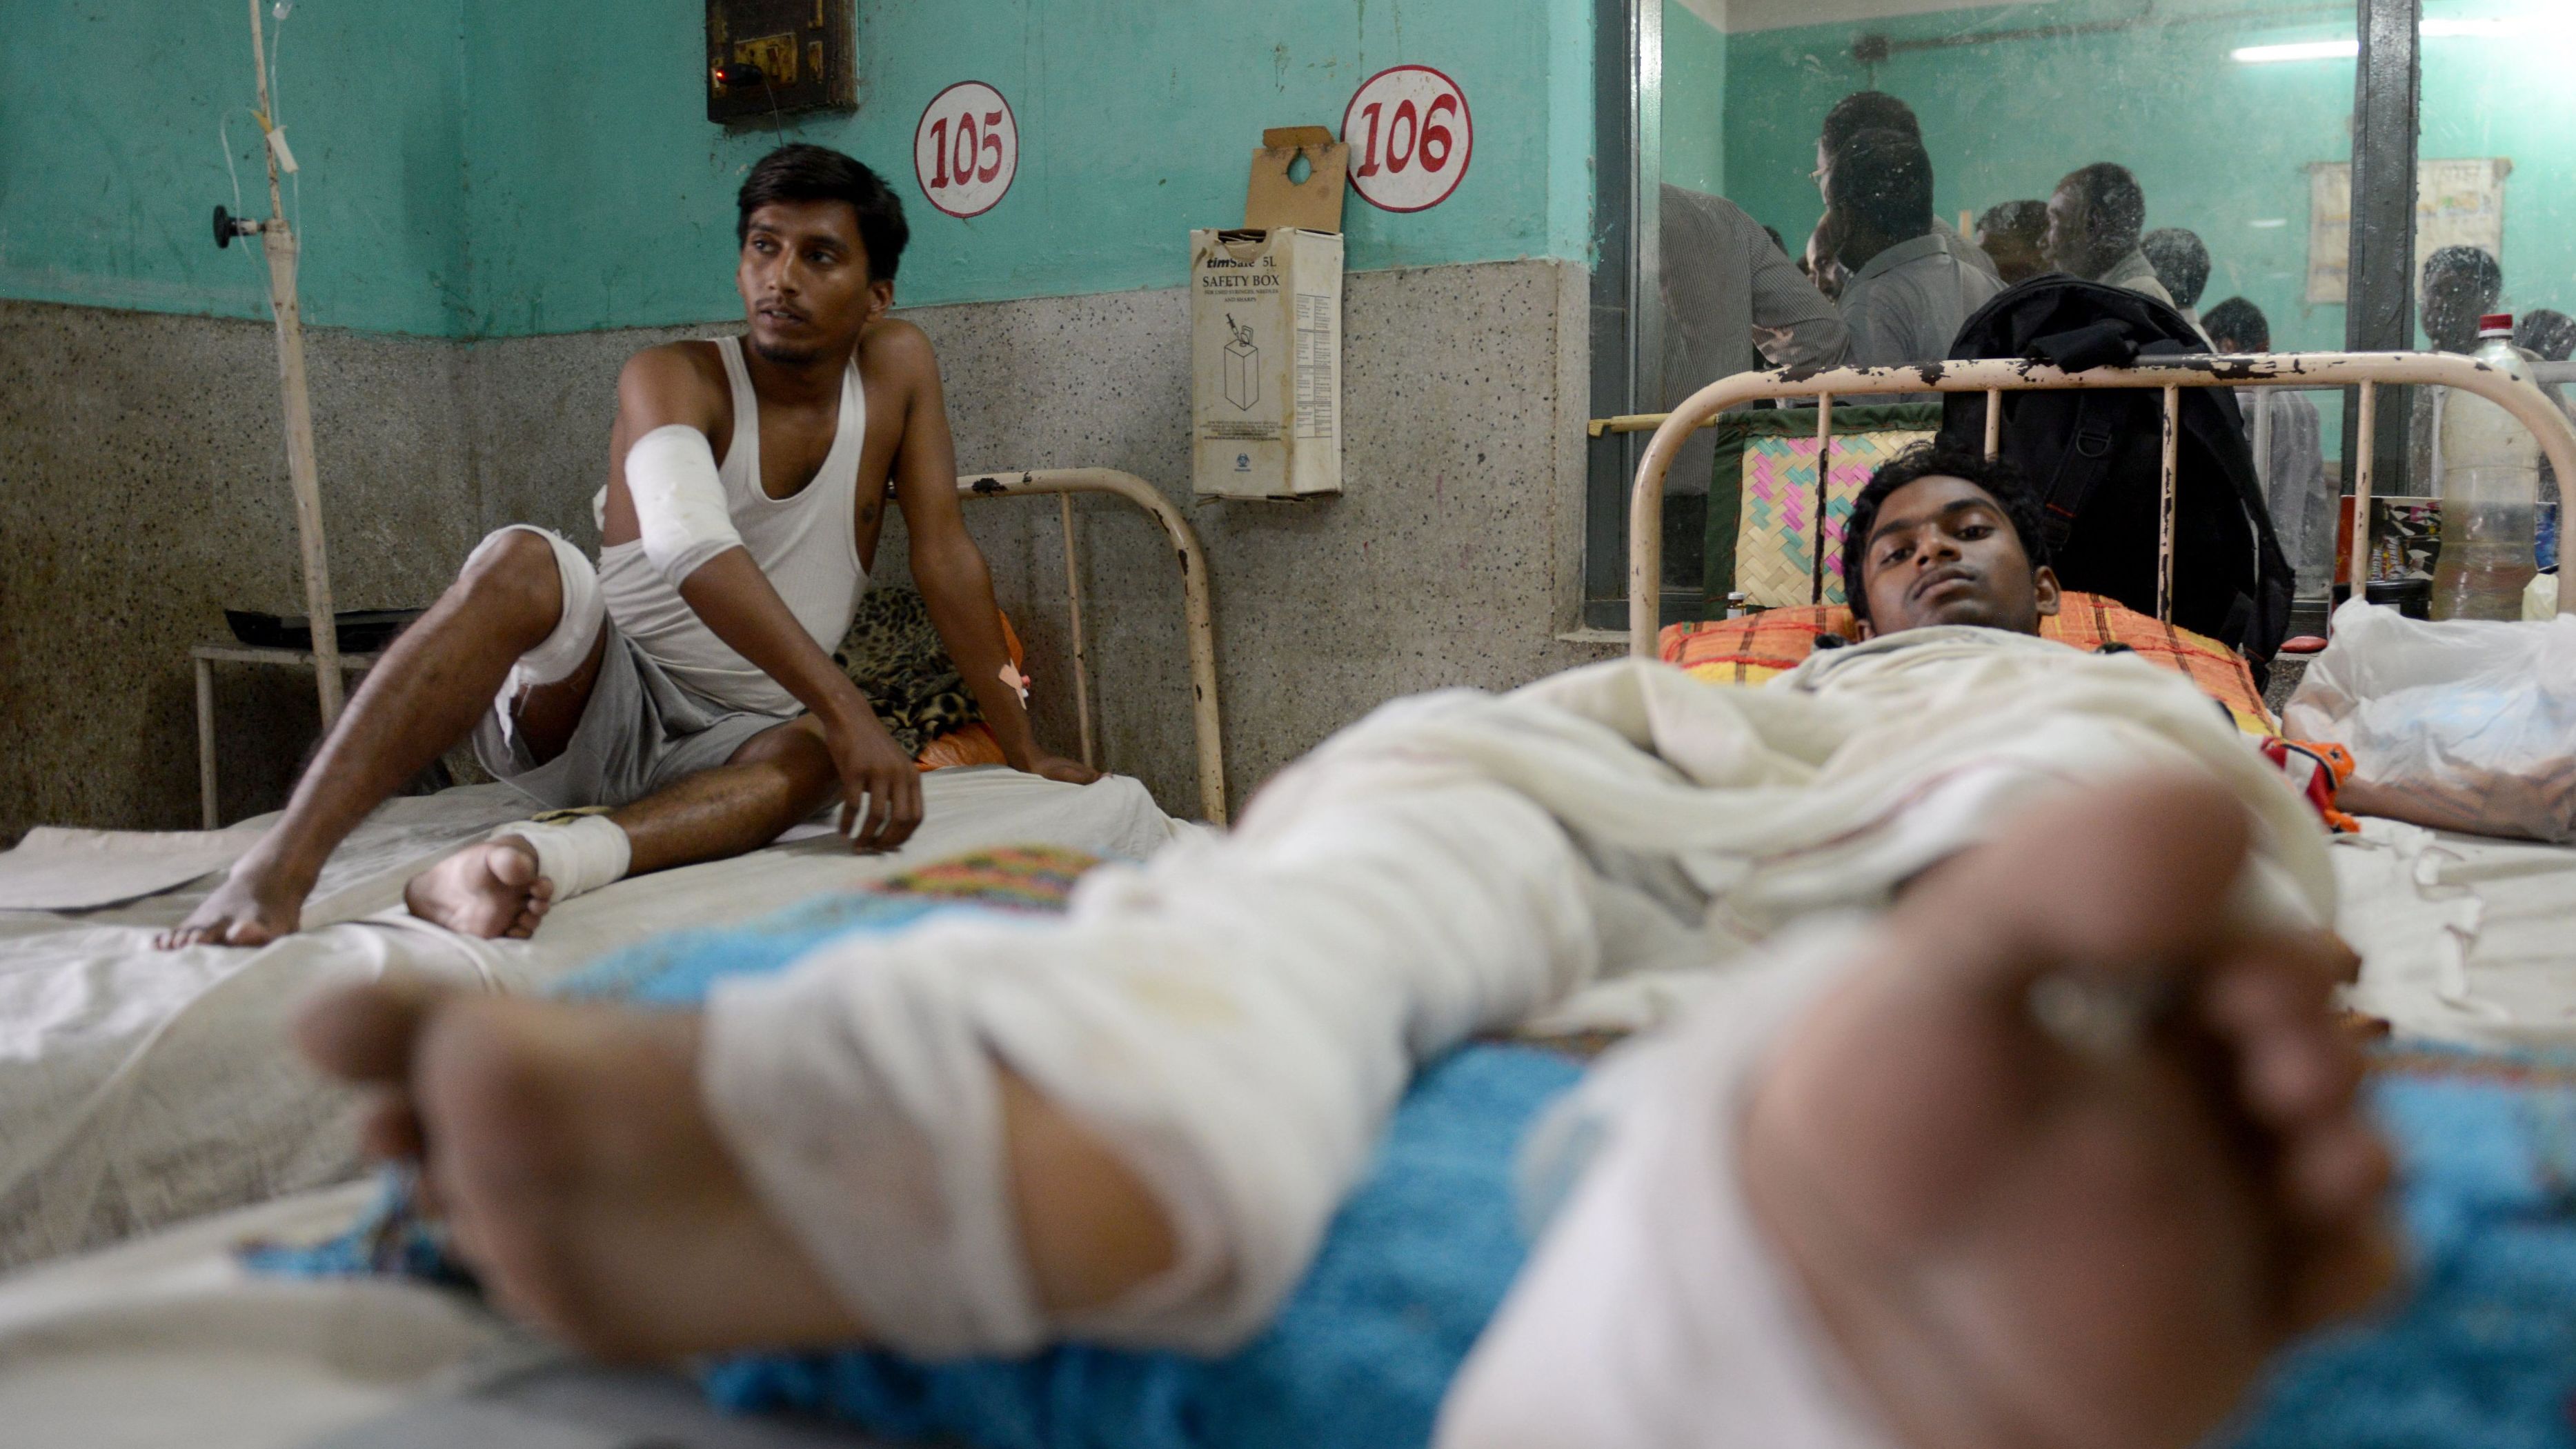 Nepalese activists receive medical treatment at a hospital near the Nepal-India border on November 4, 2015.